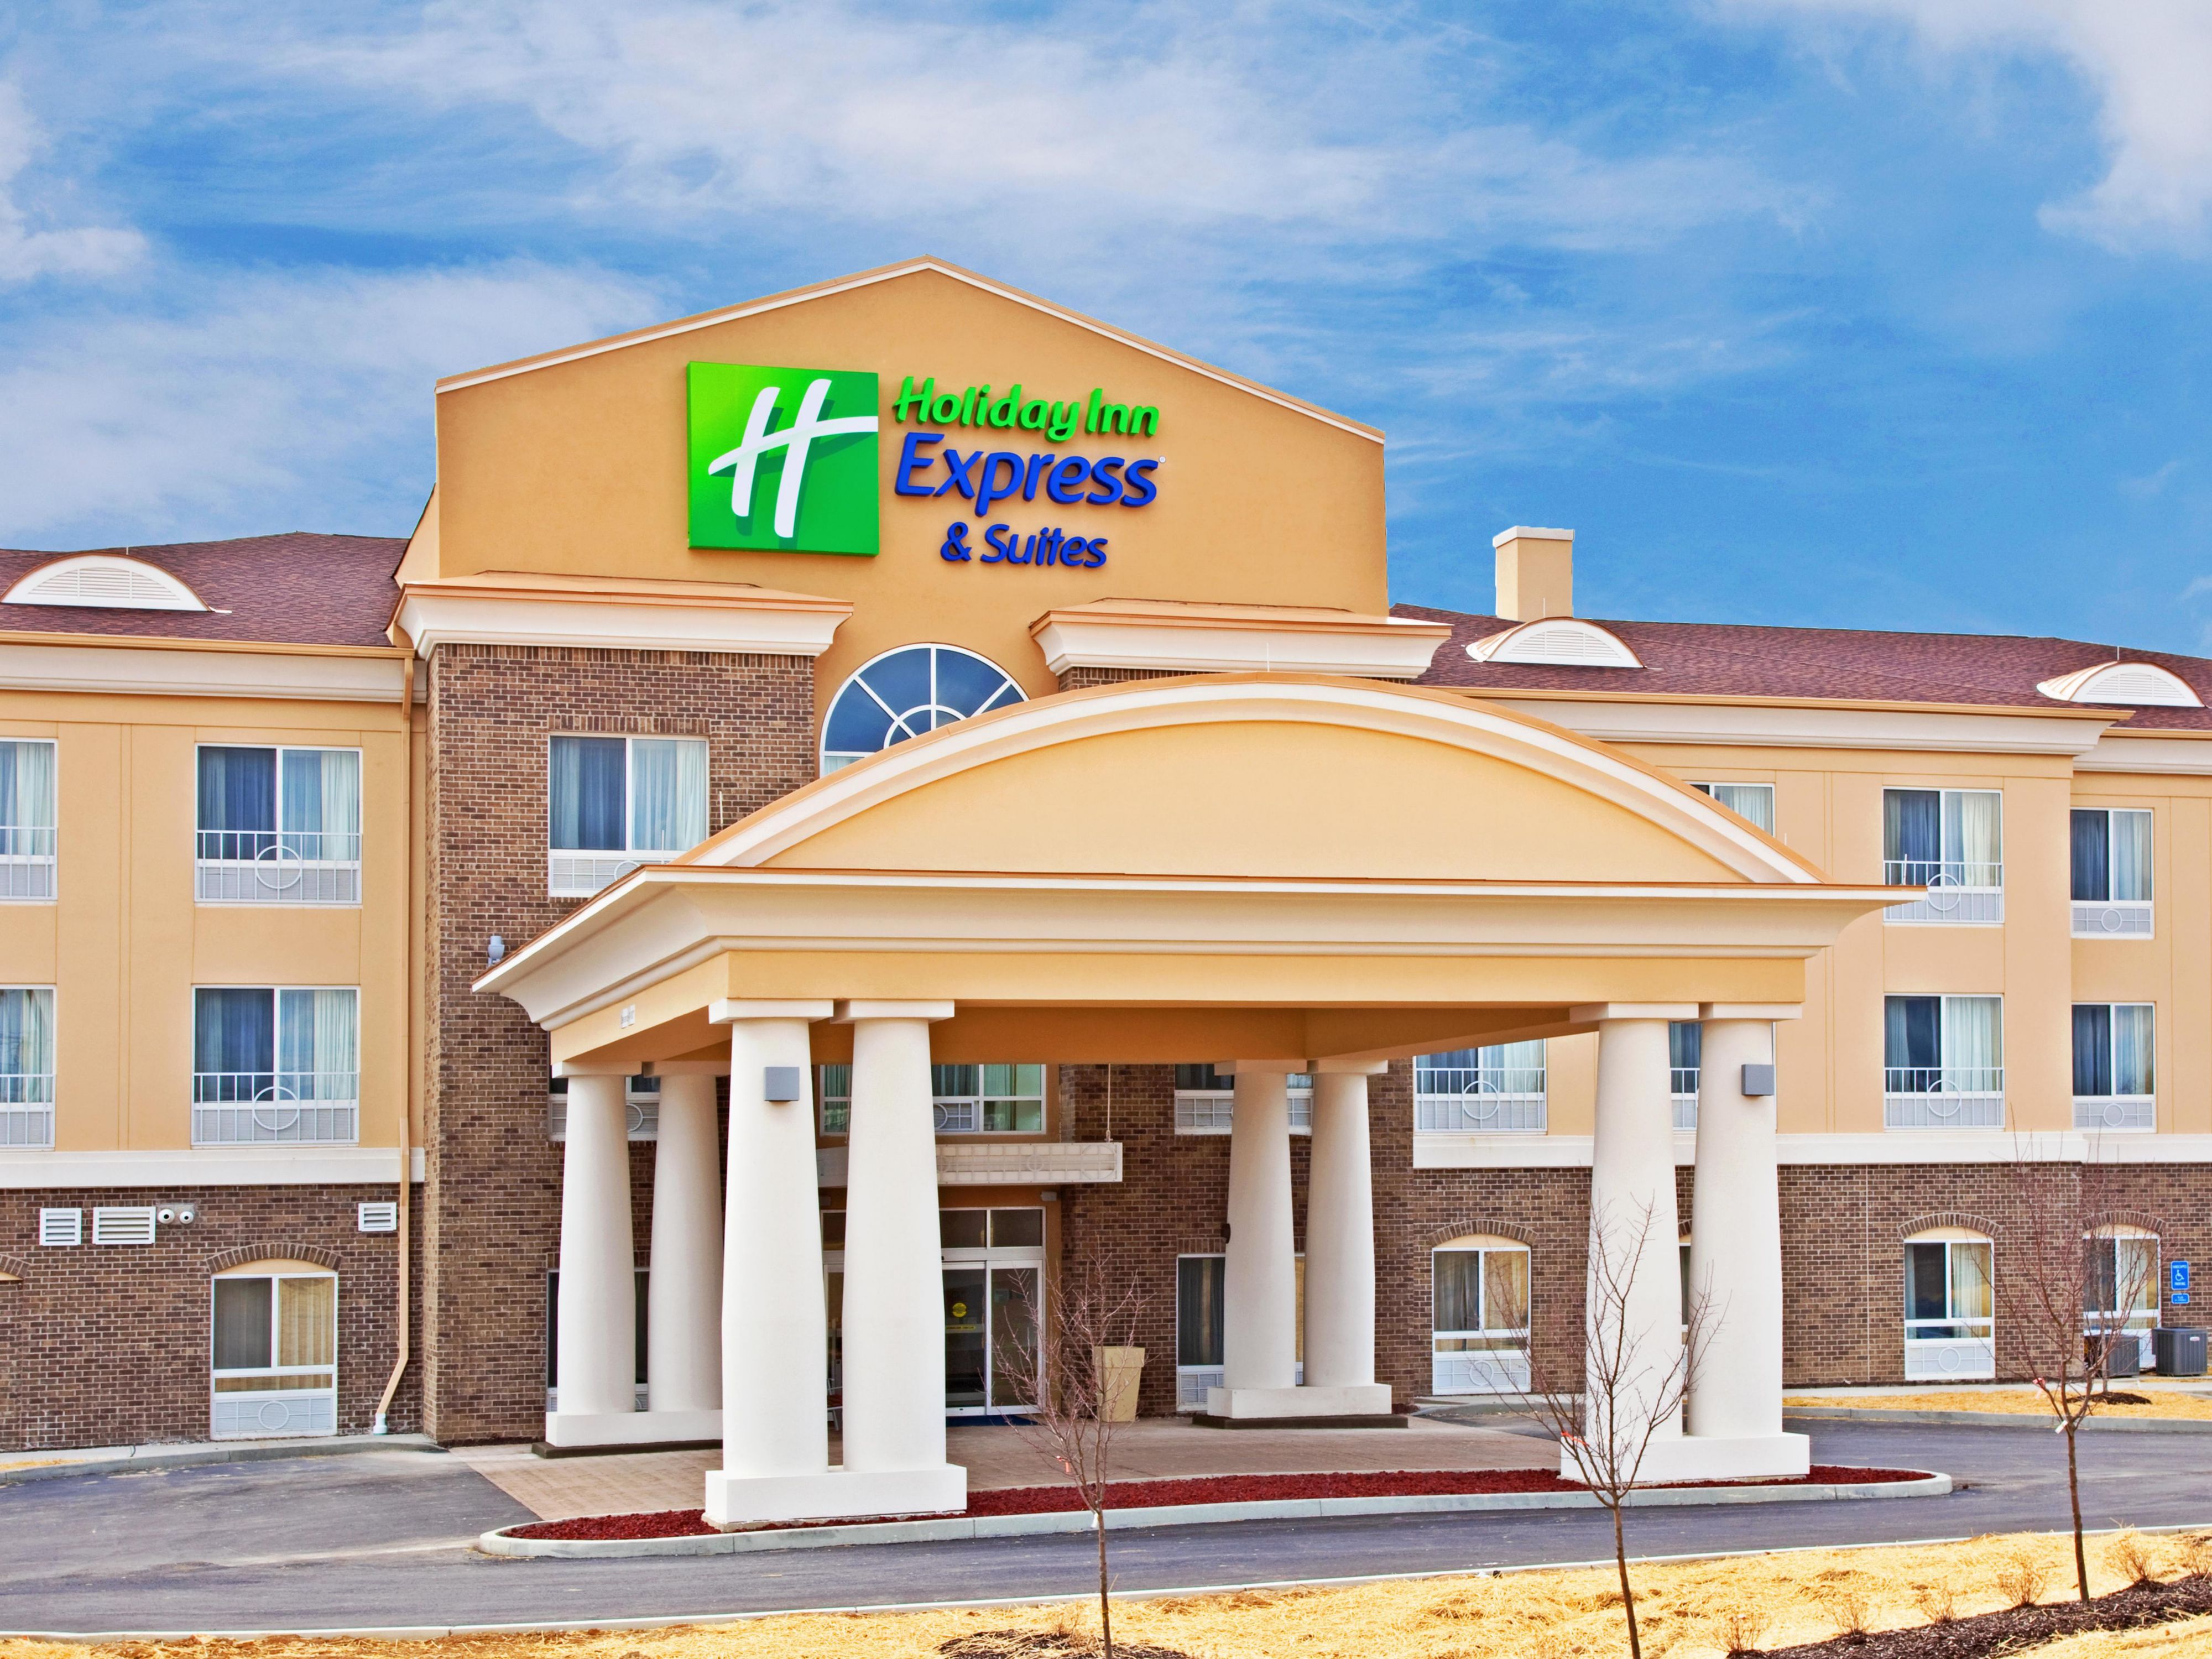 Holiday Inn Express And Suites Richwood 2532197662 4x3